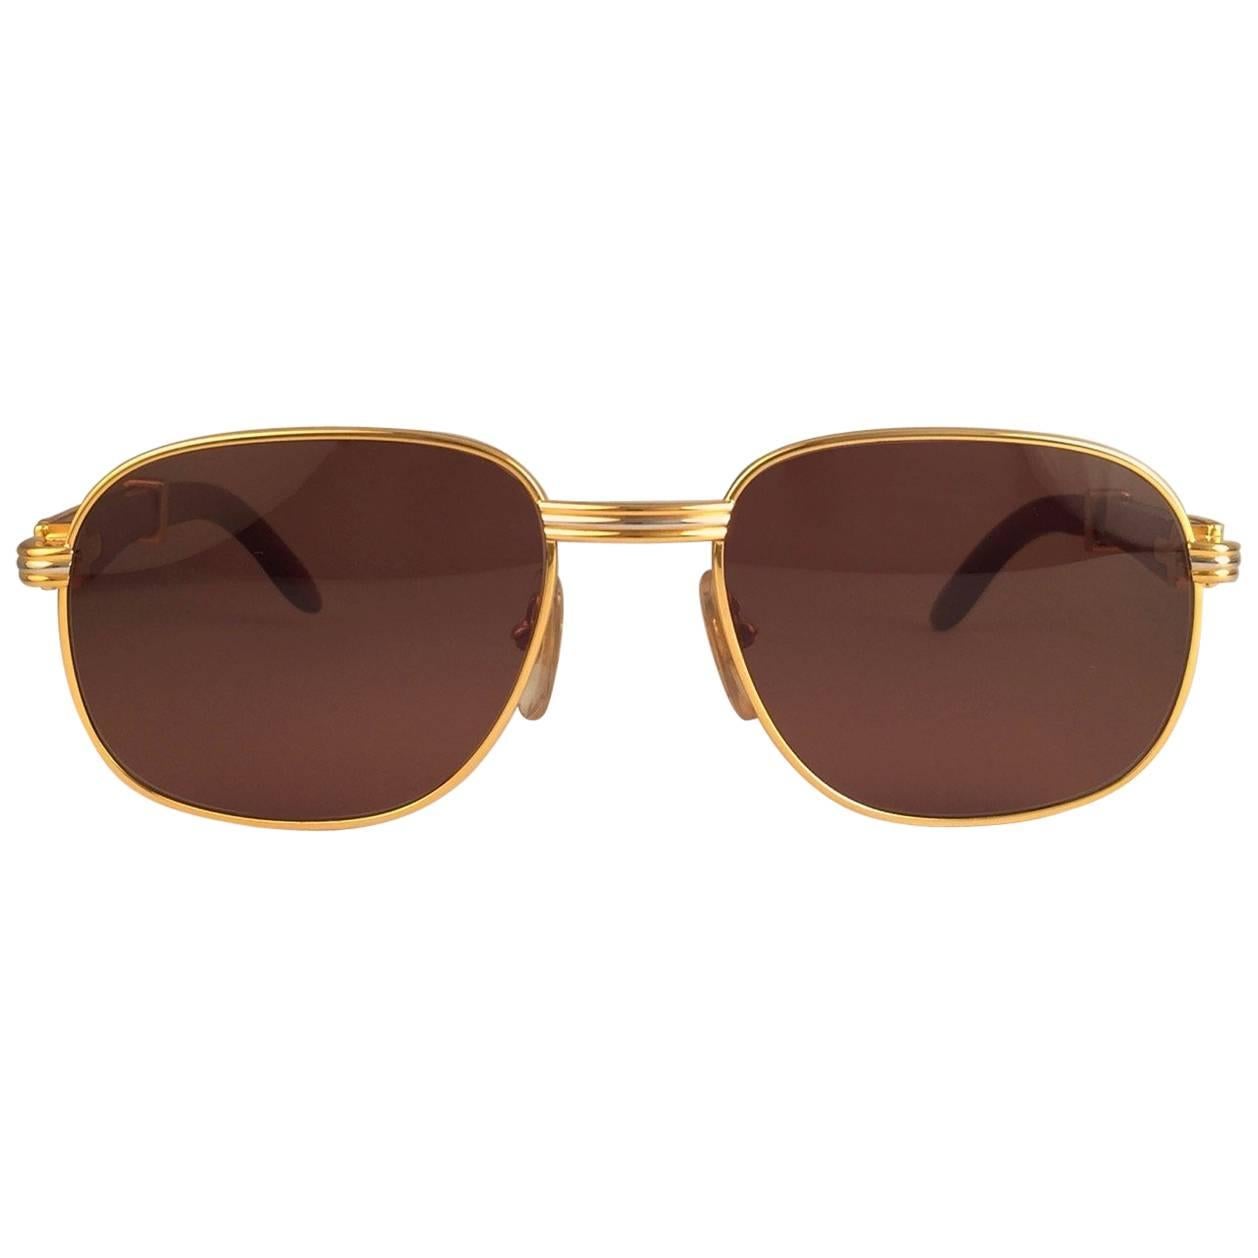 New 1990 Cartier Full Set Monceau Palisander Hardwood sunglasses with new solid honey brown (uv protection) lenses. 
Frame with the front and sides in yellow and white gold and has the famous hardwood with gold accents temples. 
Amazing